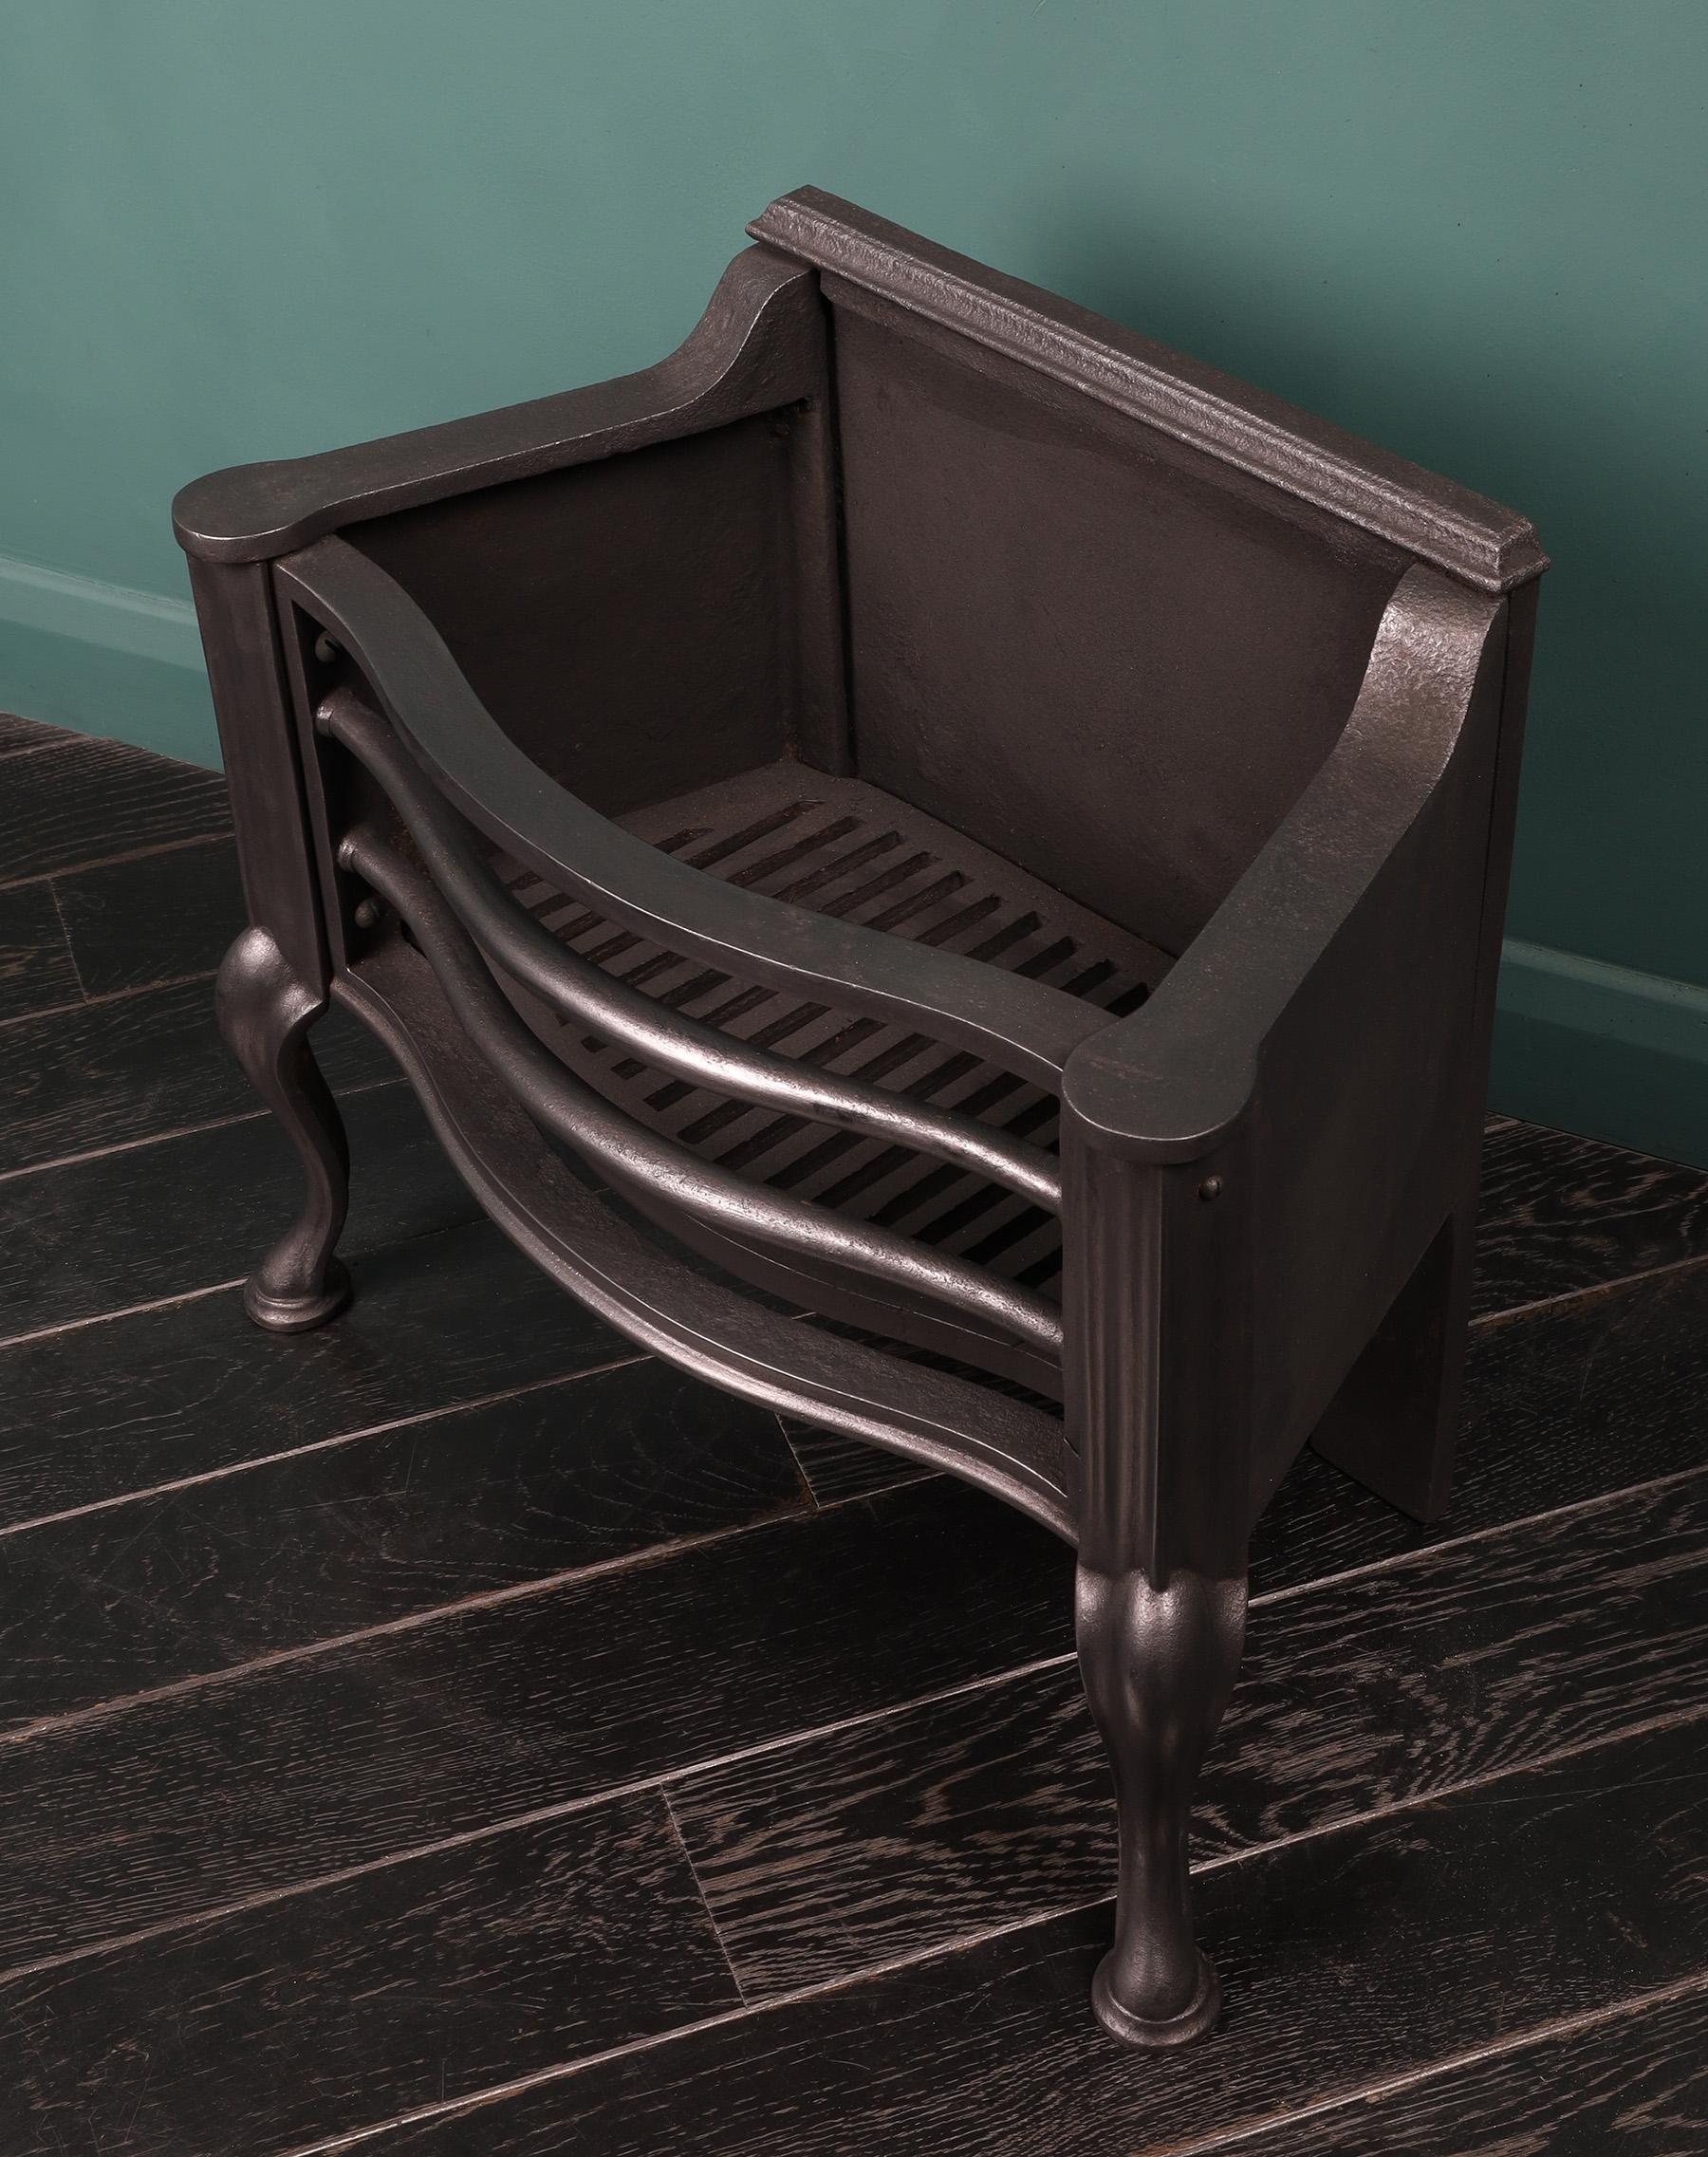 An English steel fire basket by Thomas Elsley of London in the Queen Anne manner. The basket with shaped fire bars, cabriole legs and scrolled fret. The cast-iron fire back with roller wheels. Finish in black. Restored.
Width at rear: 15 1/2